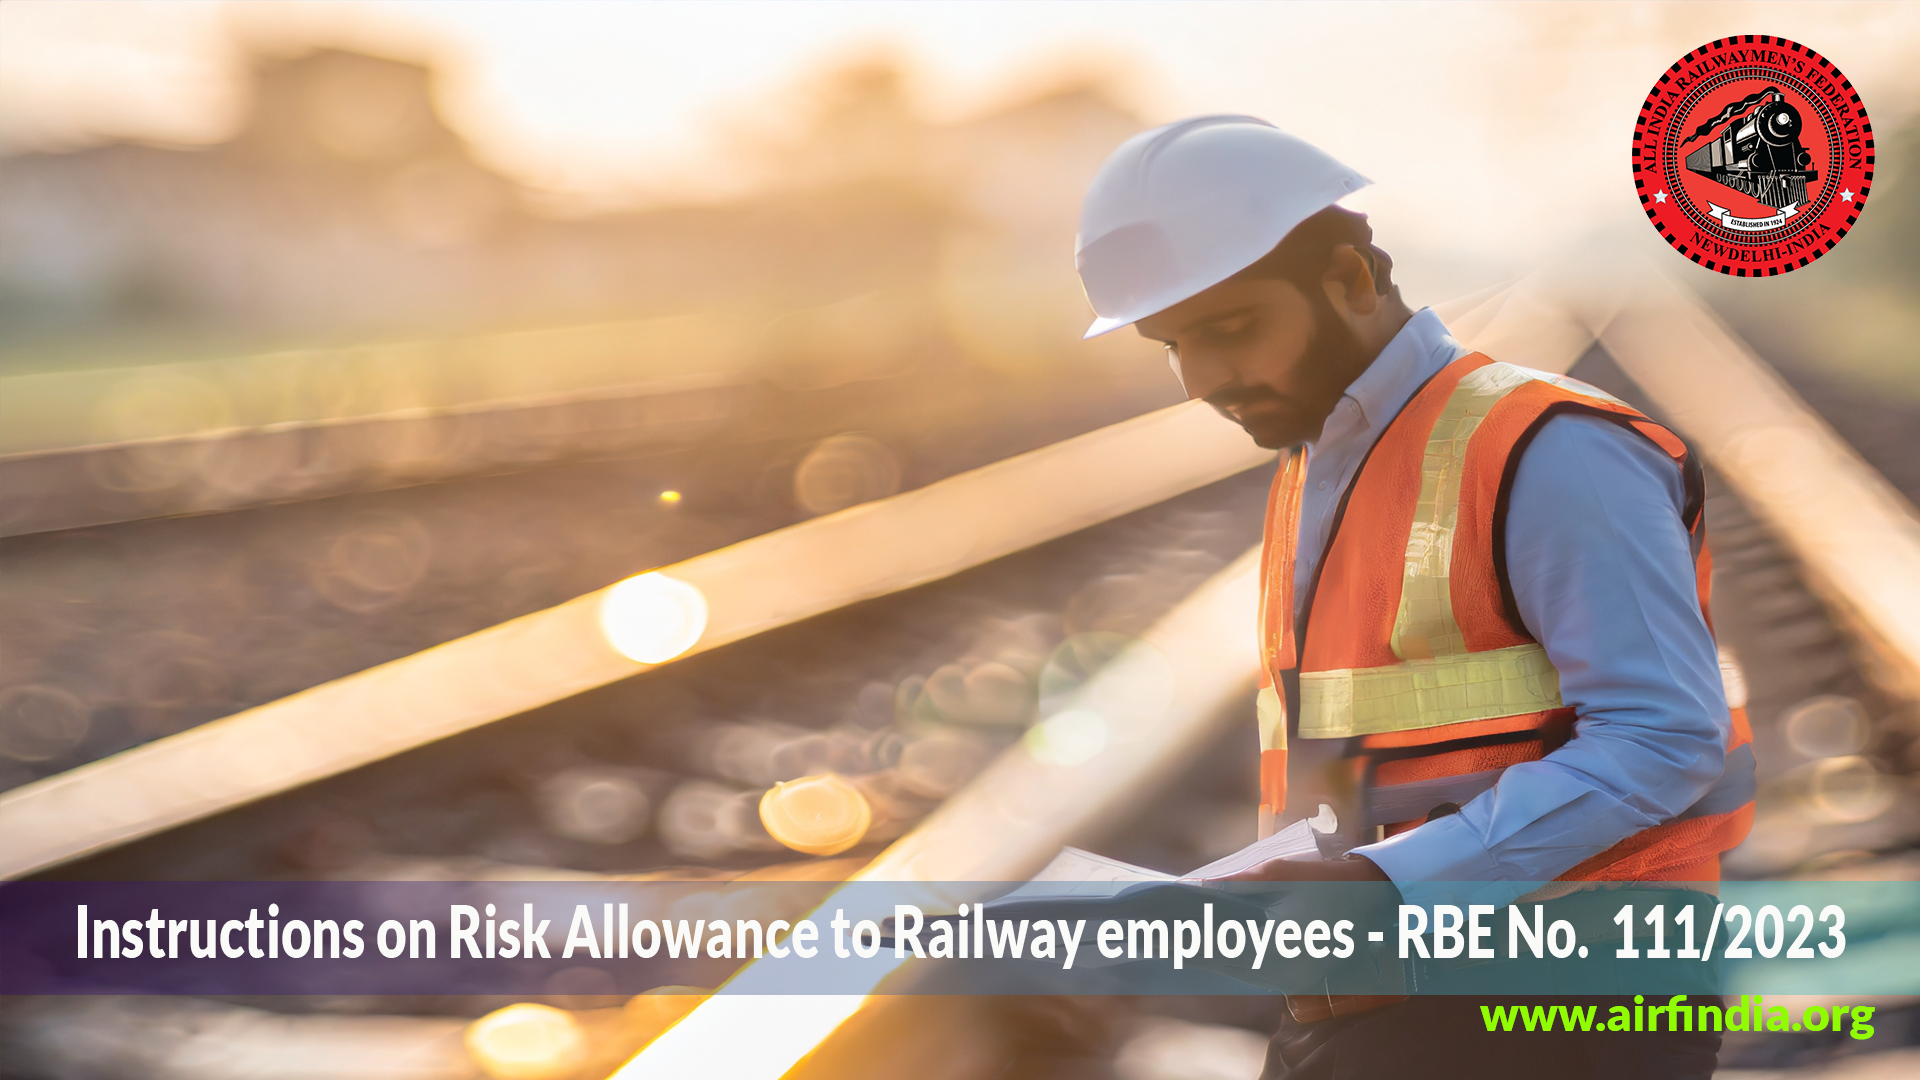 Instructions on Risk Allowance to Railway employees – RBE No. 111/2023